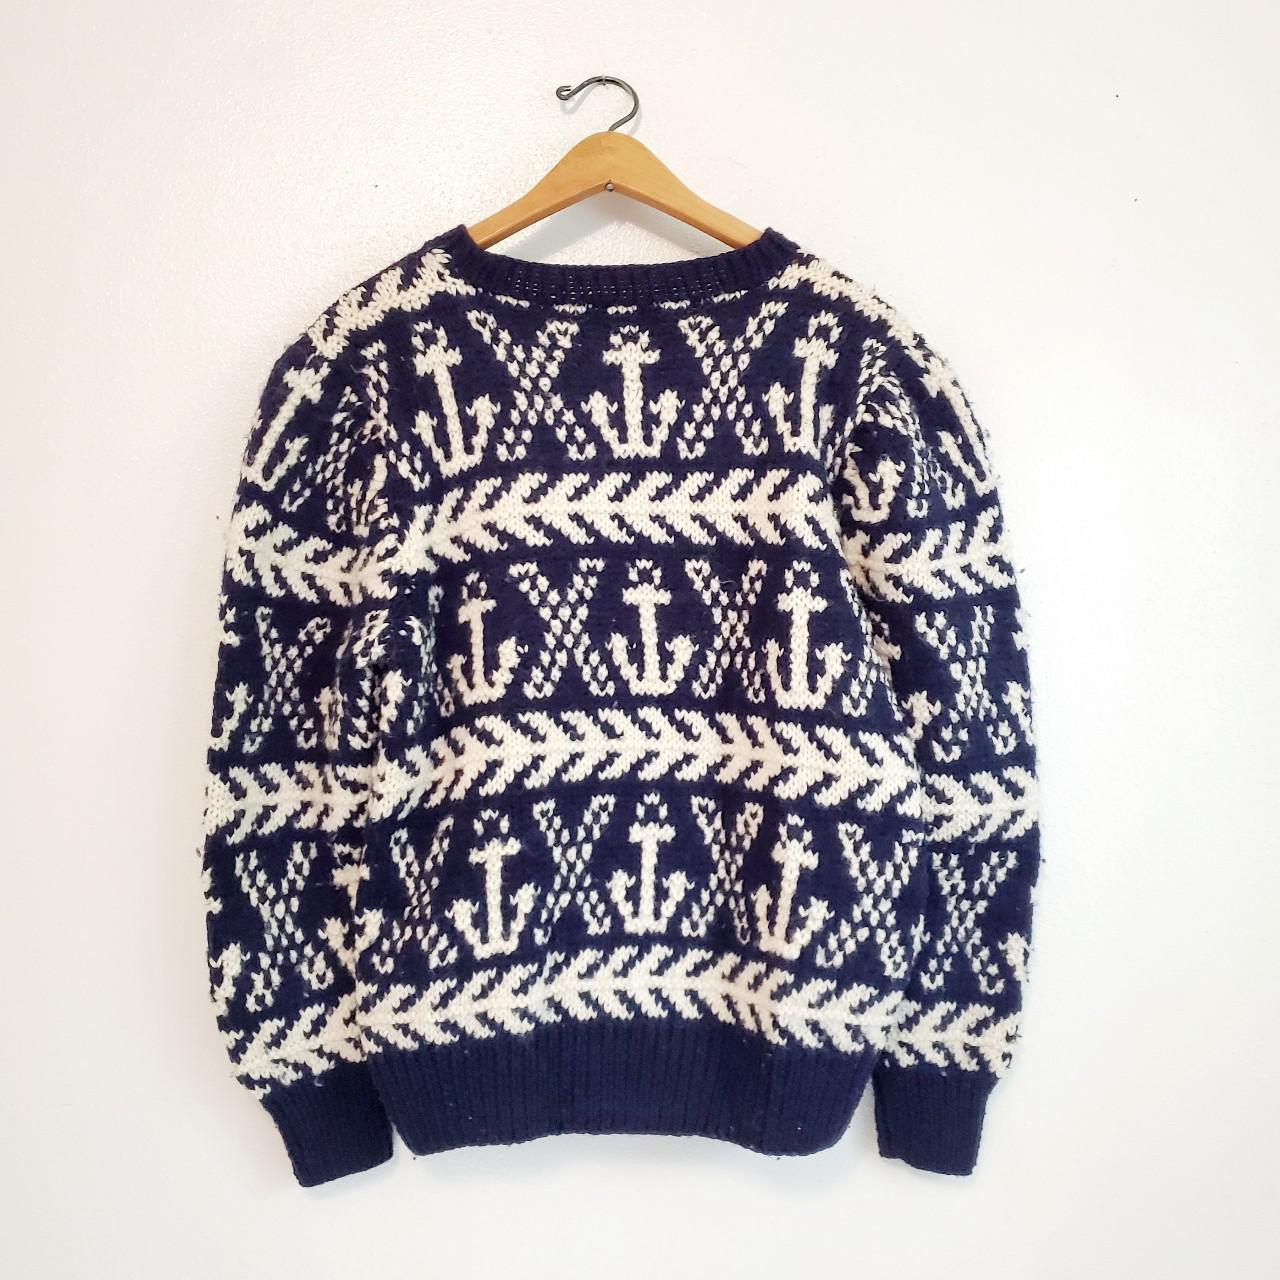 Product Image 2 - Fair Isle Wool Sweater
Anchor print

Vintage